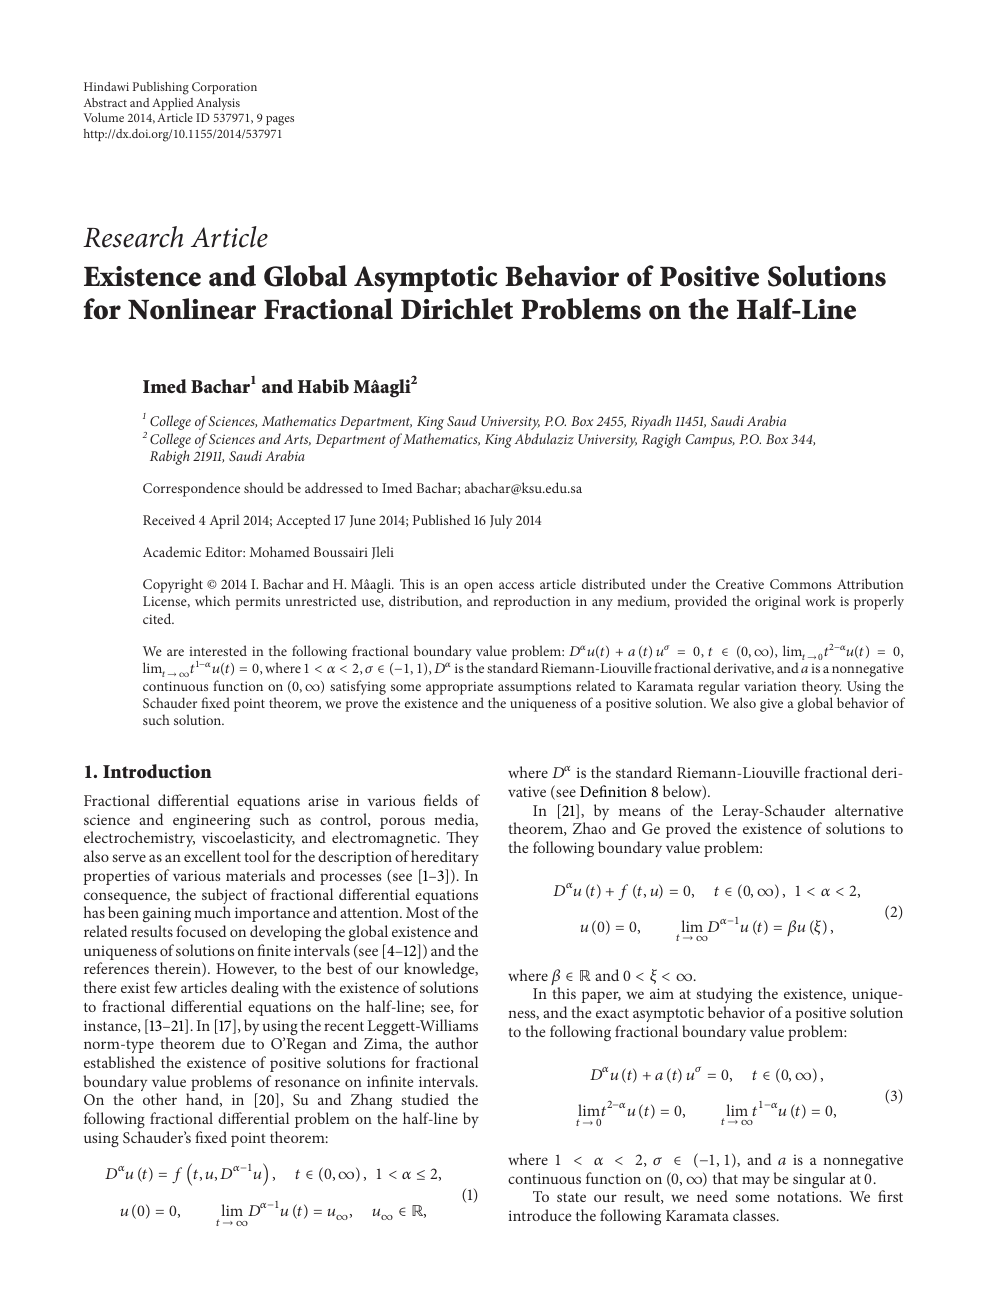 Existence And Global Asymptotic Behavior Of Positive Solutions For Nonlinear Fractional Dirichlet Problems On The Half Line Topic Of Research Paper In Mathematics Download Scholarly Article Pdf And Read For Free On